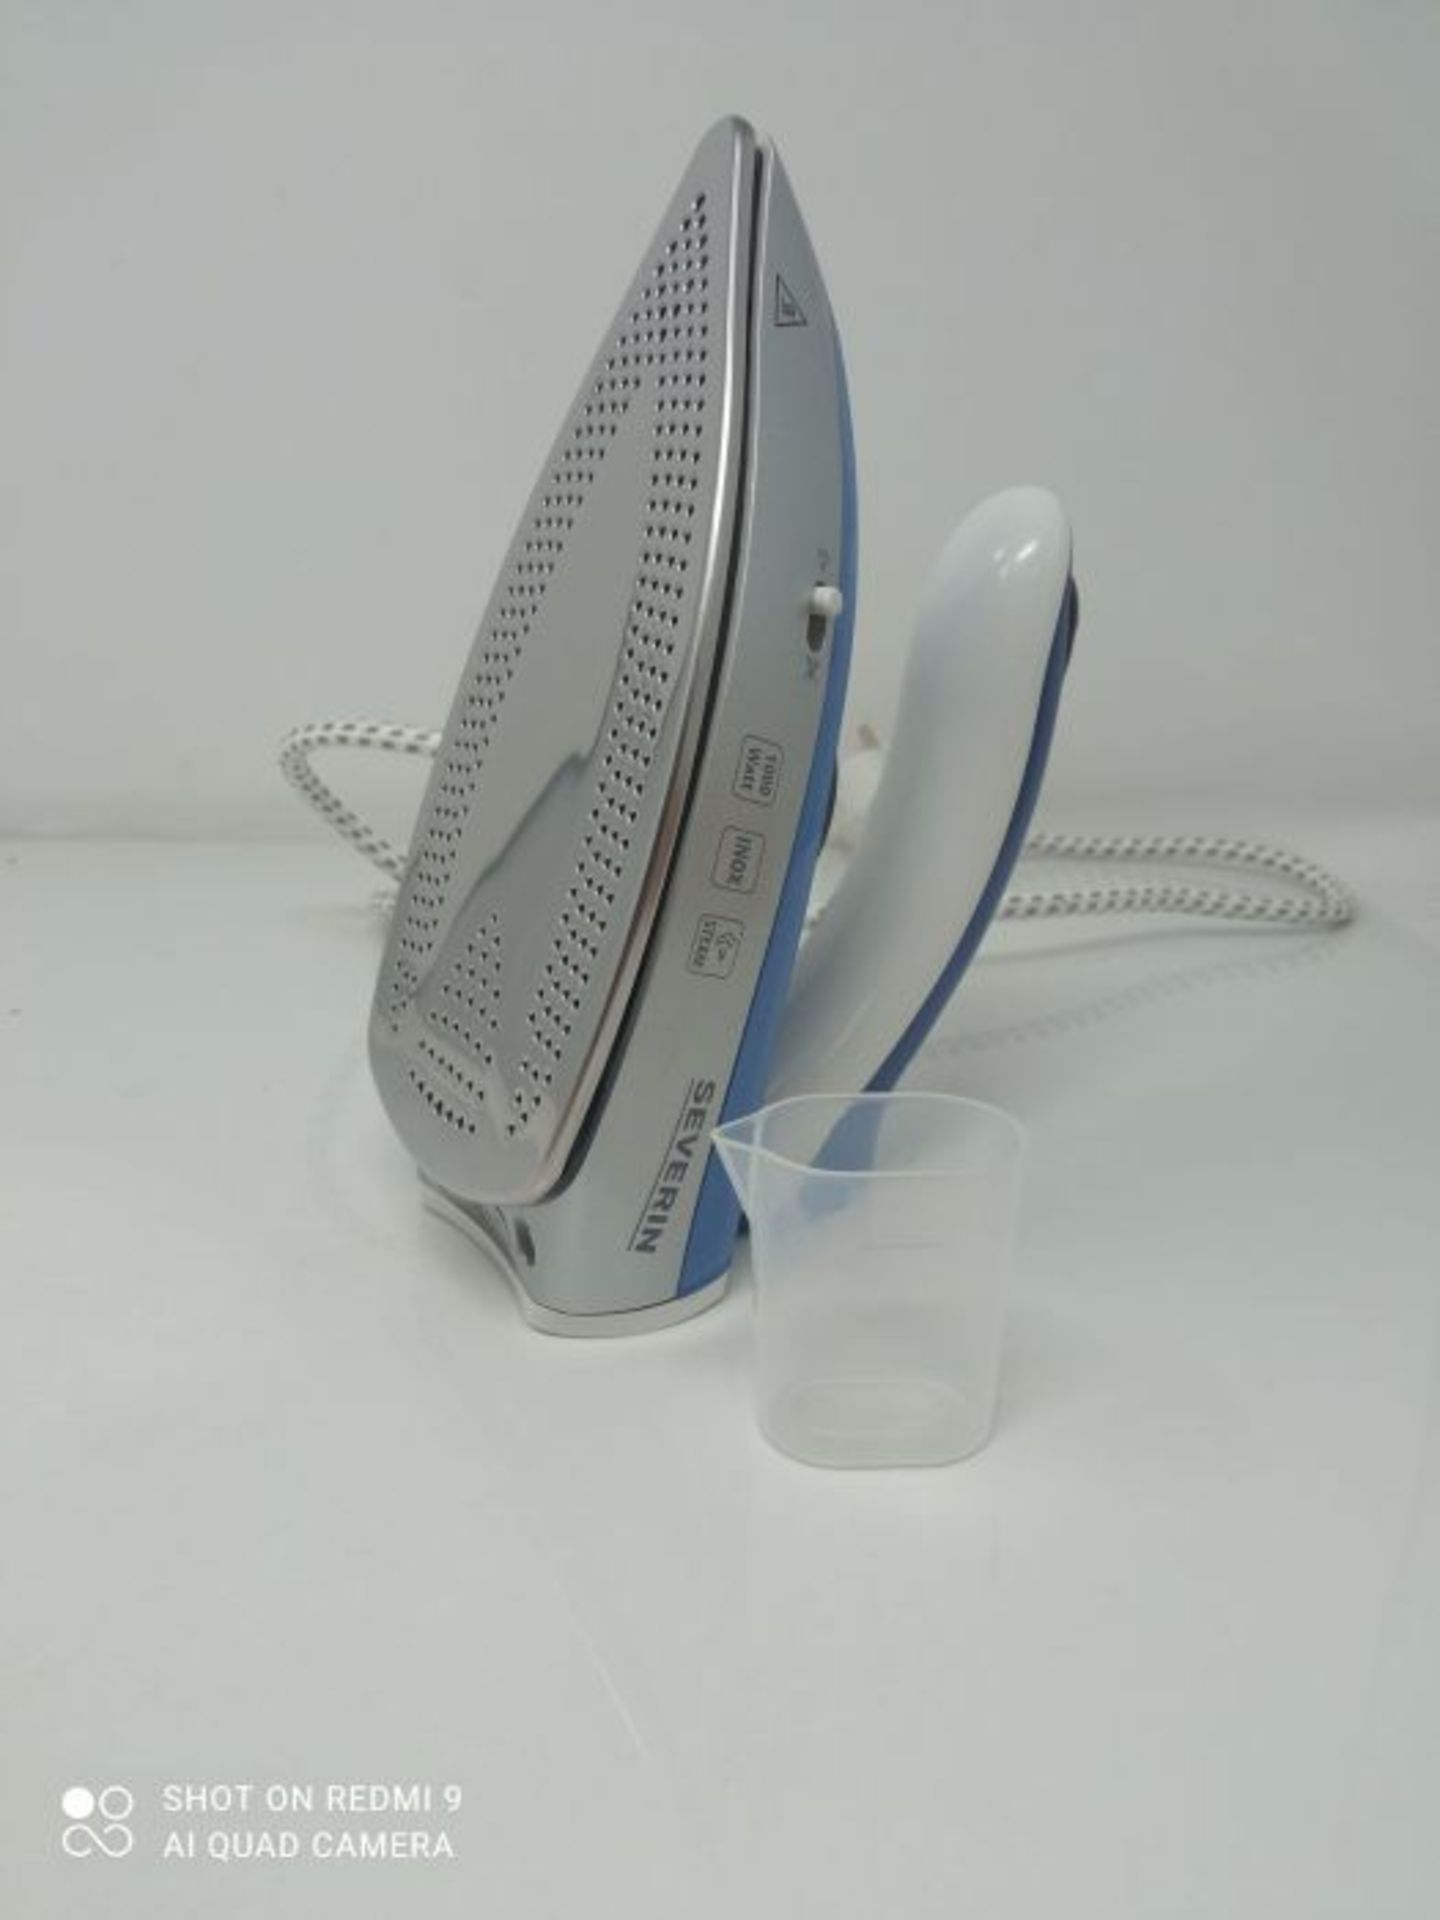 SEVERIN Travel STEAM Iron BA 3234 / Silver - Blue, 1000W, 50ml Water Tank and Foldable - Image 3 of 3